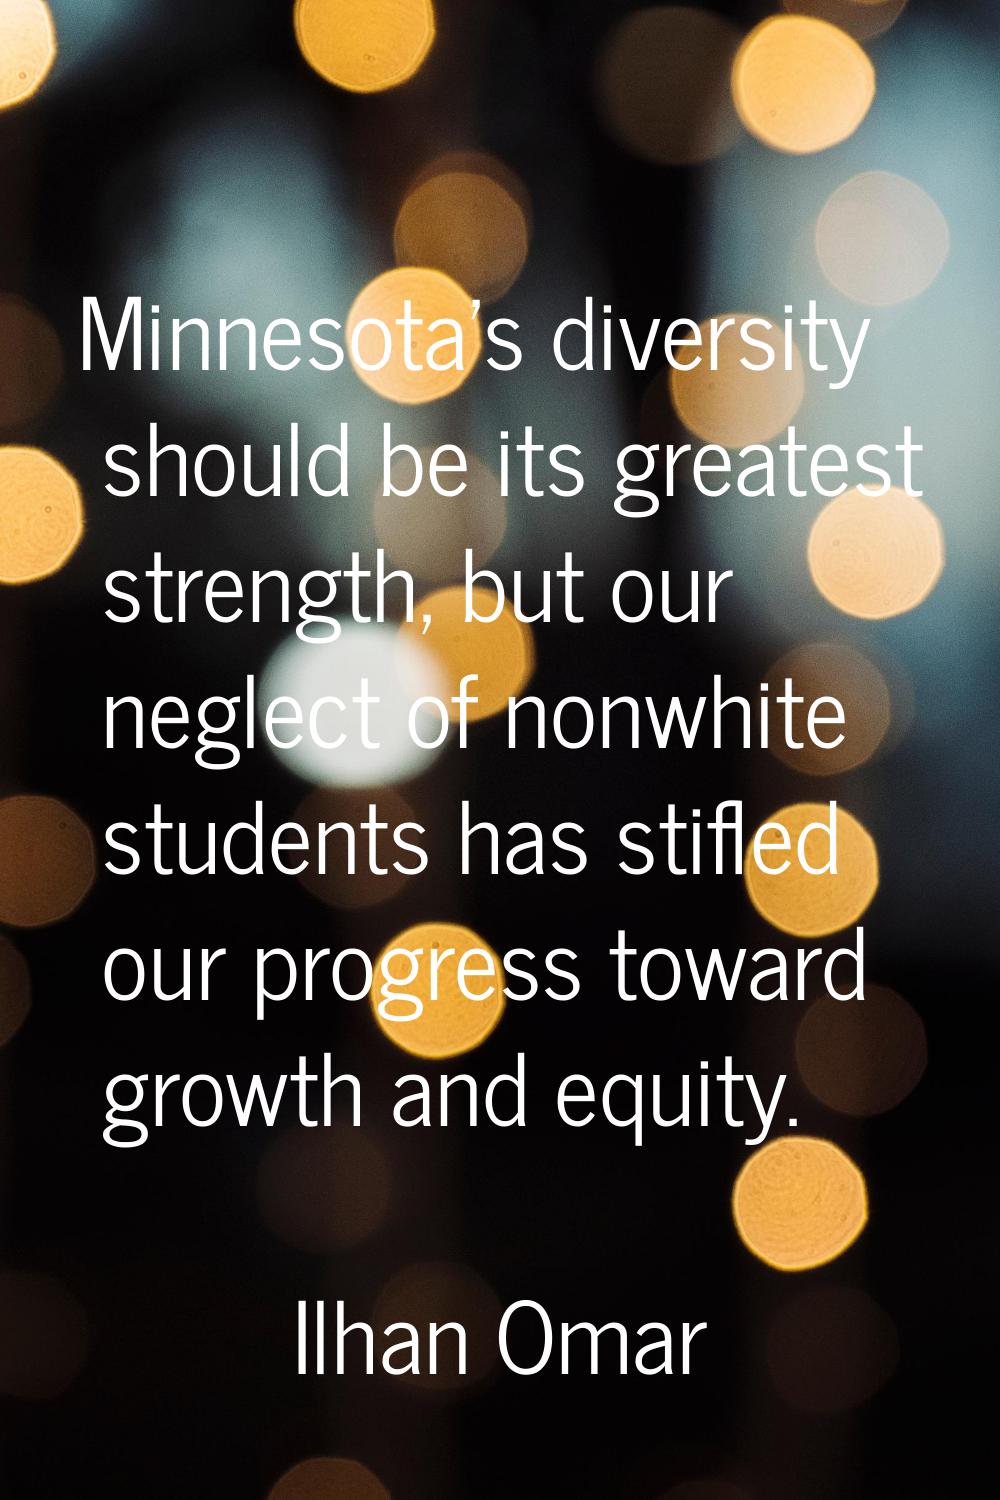 Minnesota's diversity should be its greatest strength, but our neglect of nonwhite students has sti